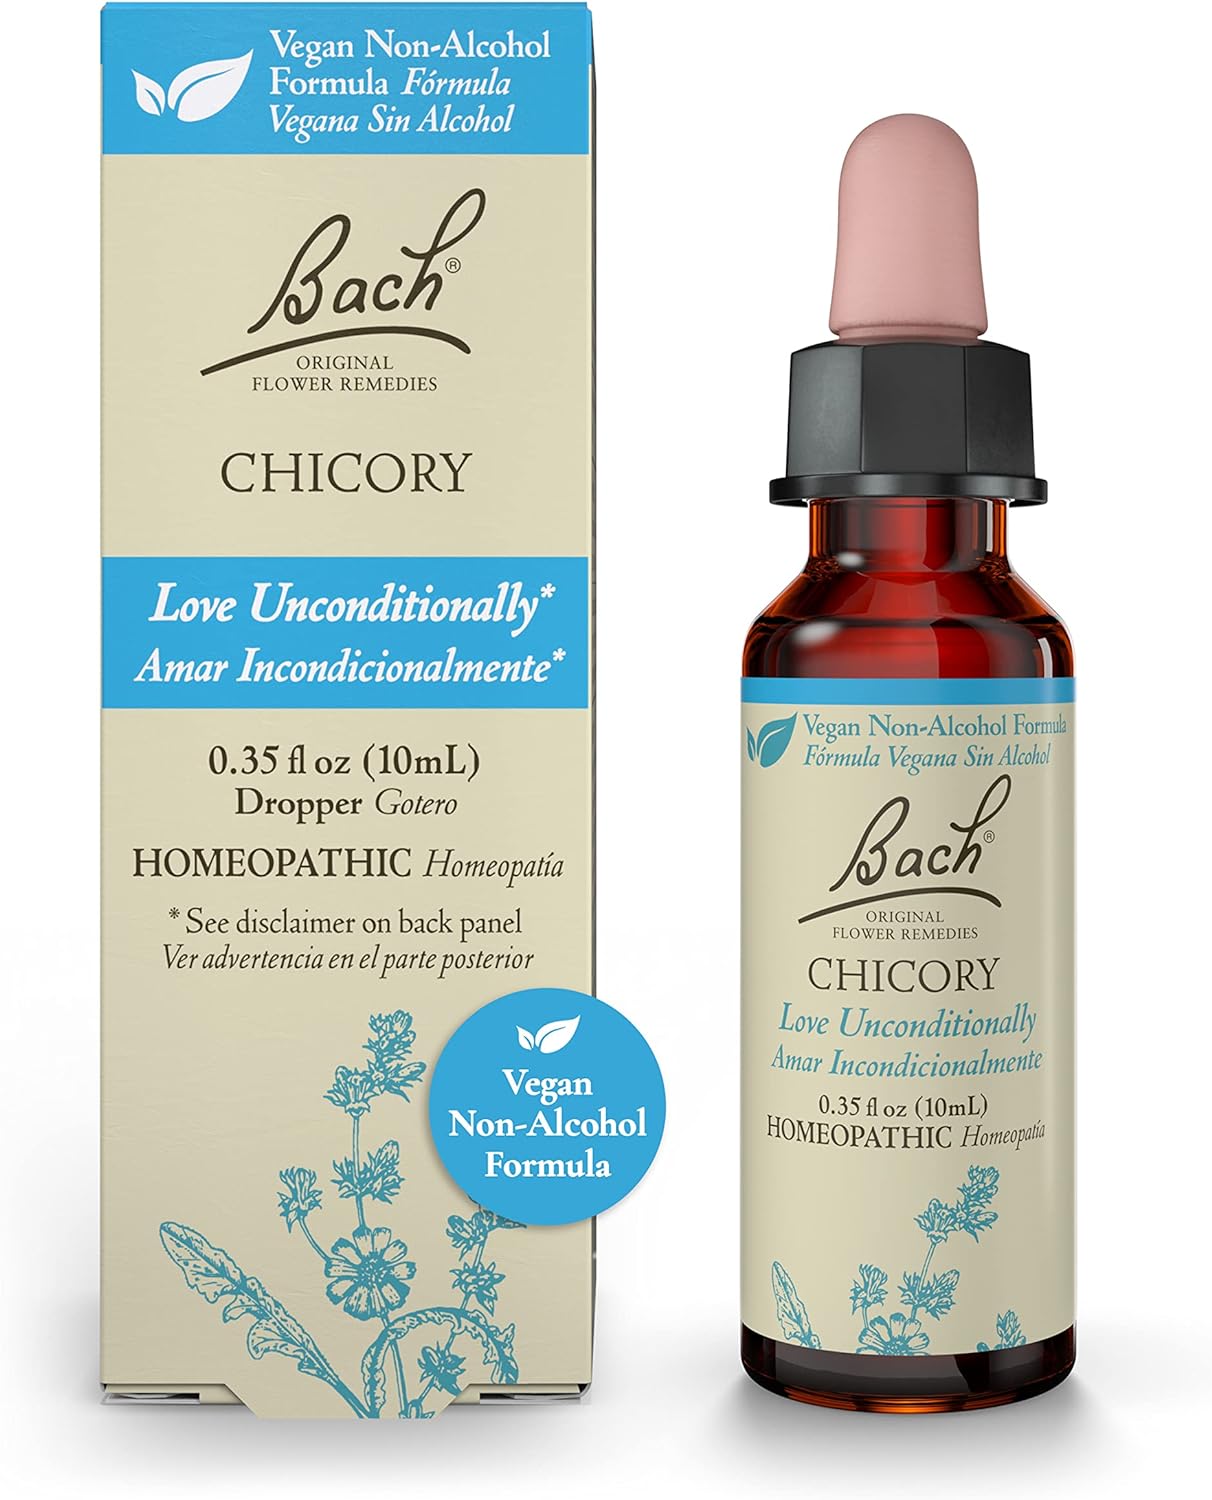 Bach Original Flower Remedies, Chicory for Unconditional Love (Non-Alcohol Formula), Natural Homeopathic Flower Essence, Holistic Wellness and Stress Relief, Vegan, 10mL Dropper